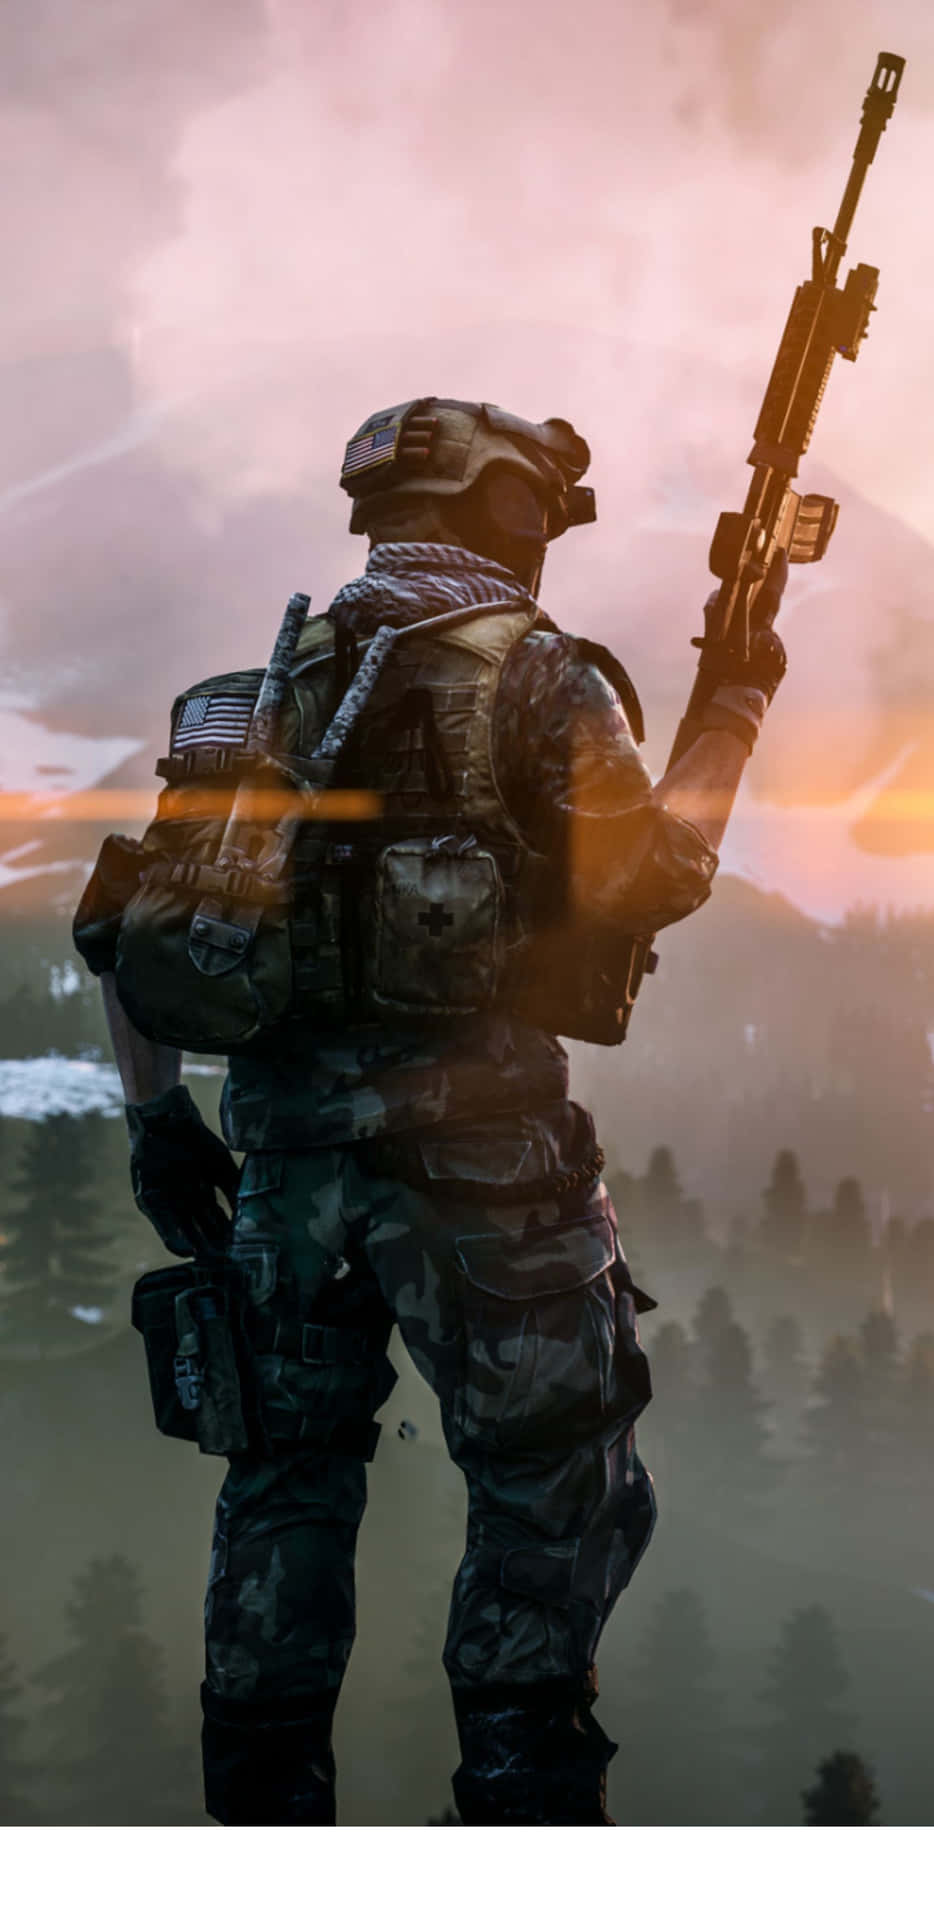 A Soldier Is Holding A Rifle In Front Of A Sunset